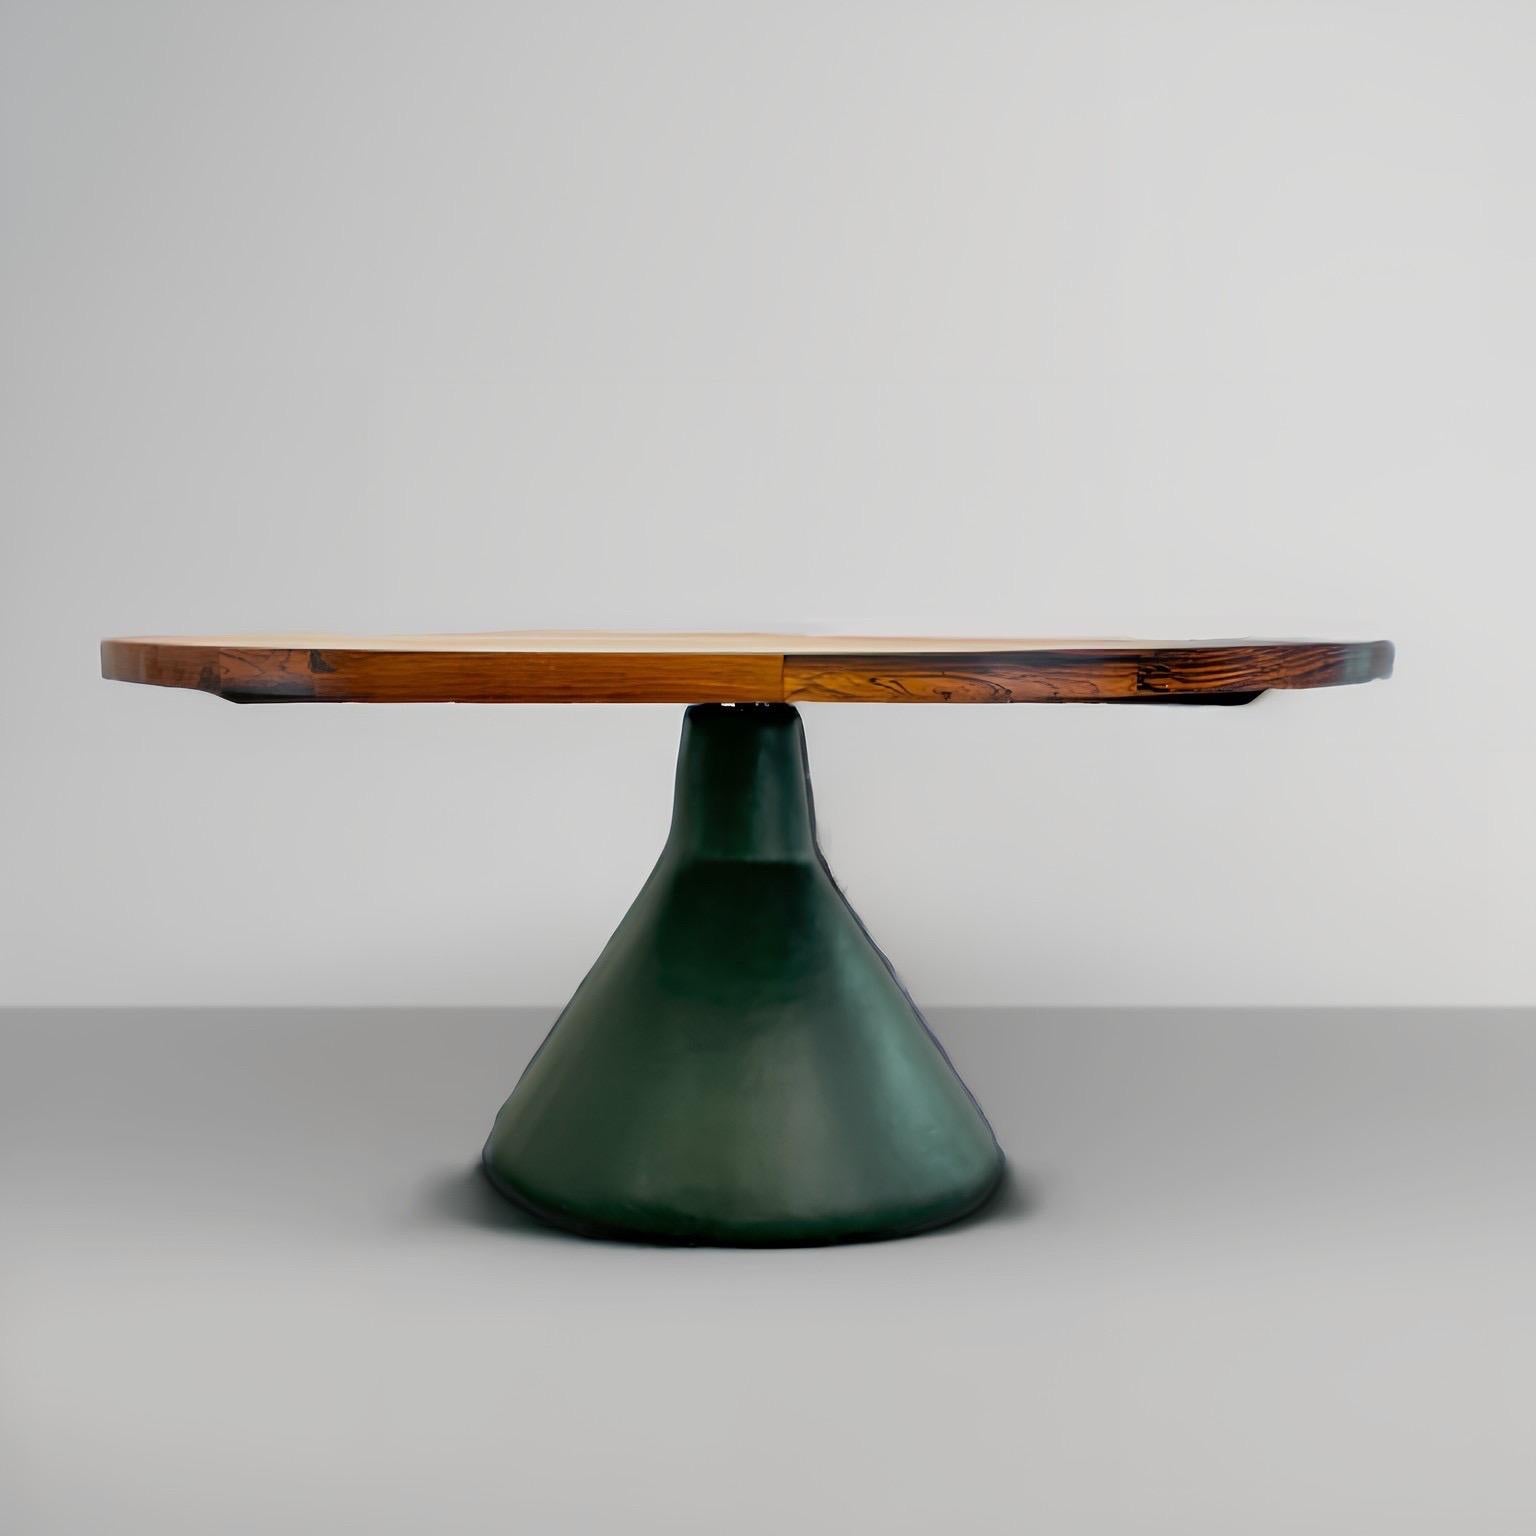 Brazilian Mid-Century Modern Round Wooden Leather Dining Table by Jorge Zalszupin, 1960s